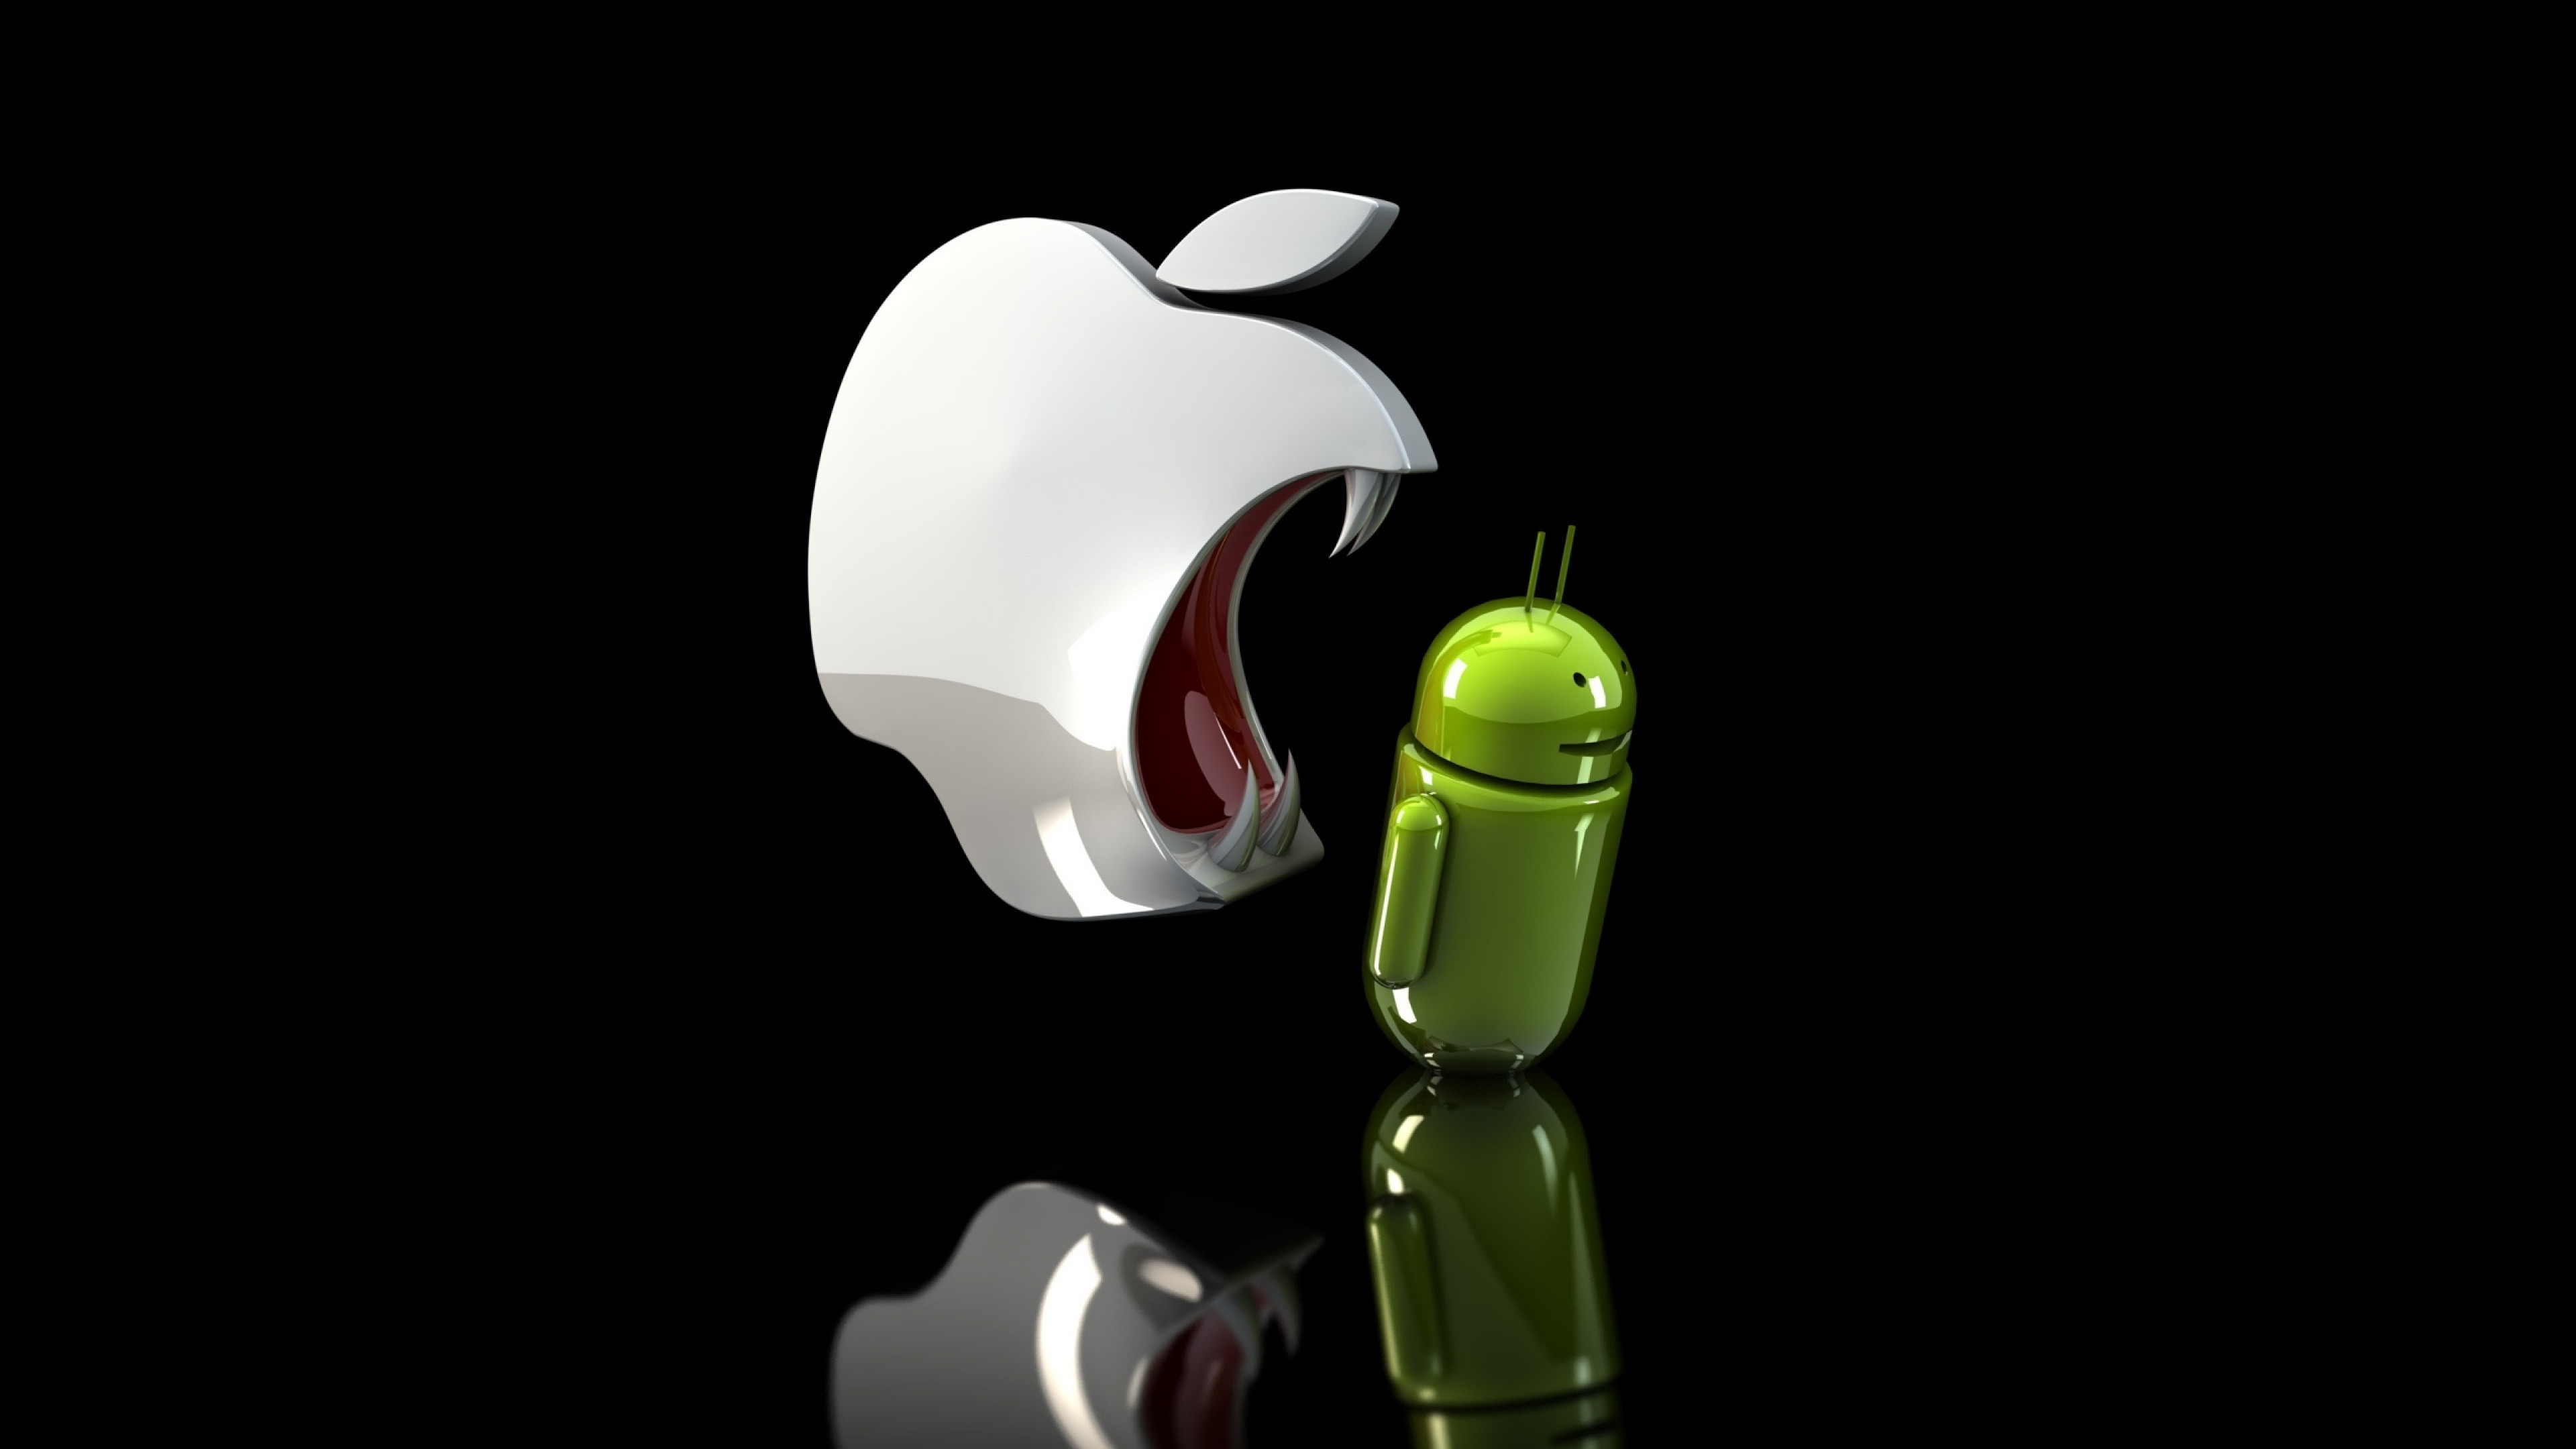 3840x2160  Wallpaper apple vs android, android, competition